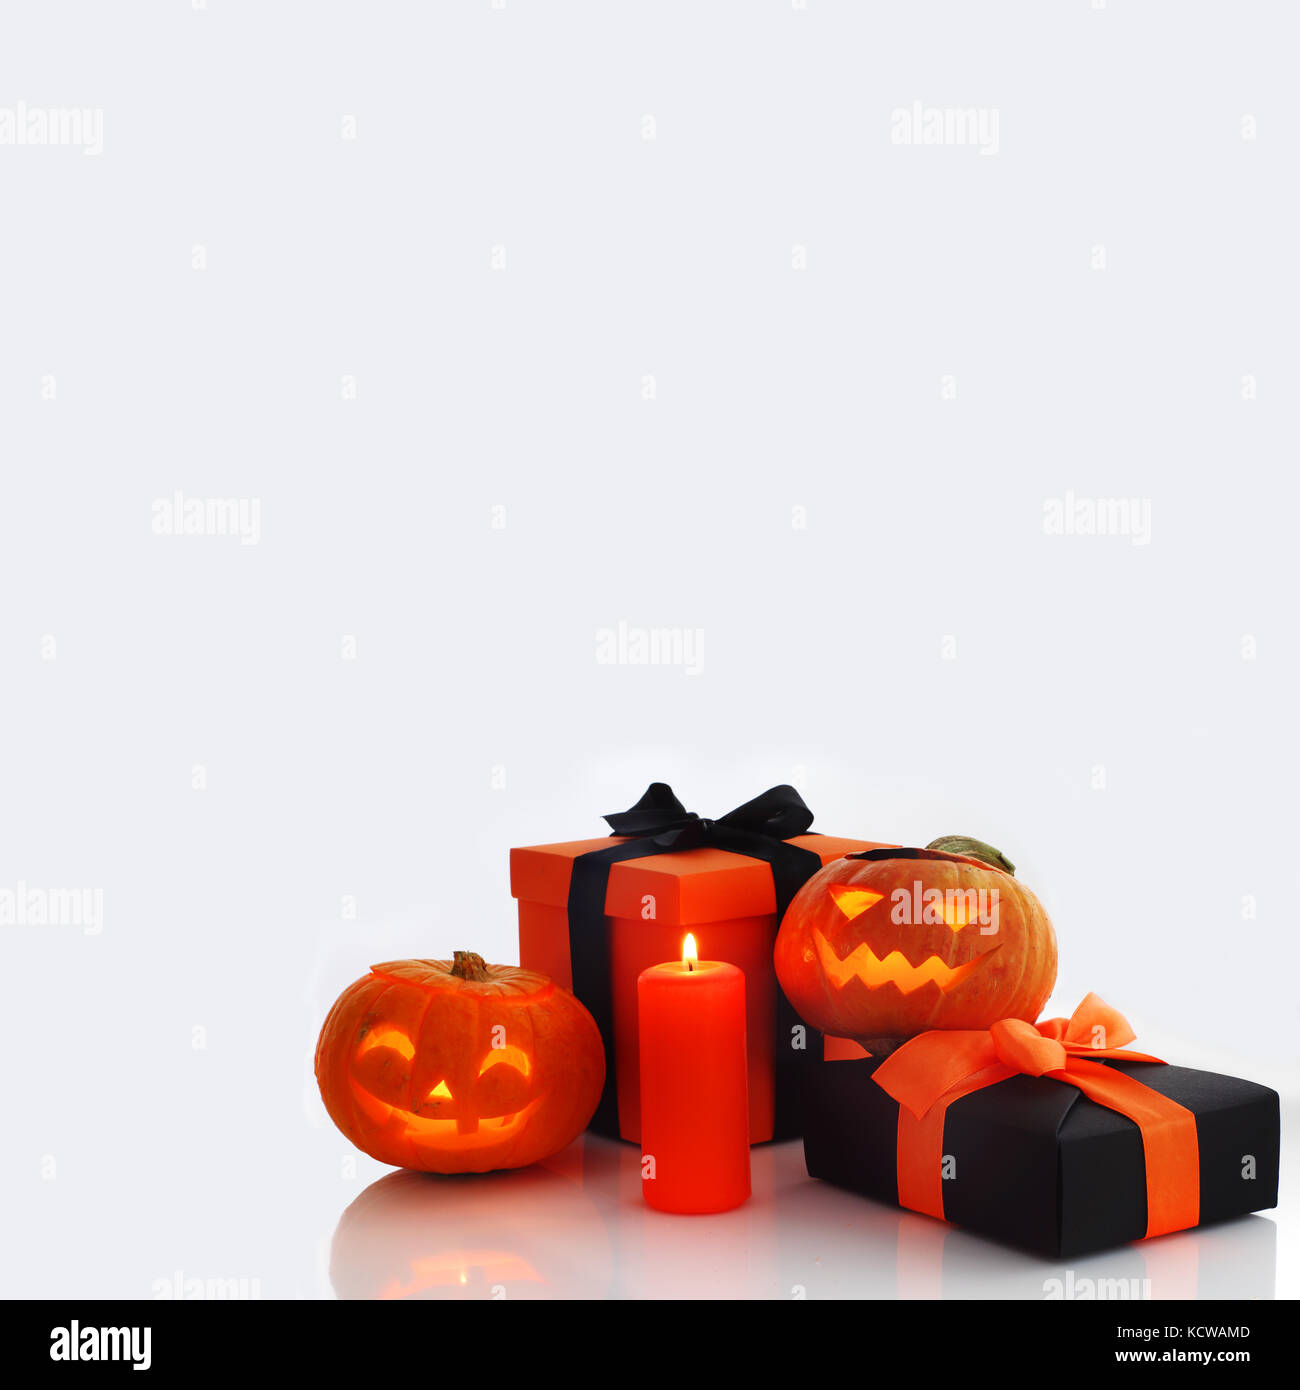 Halloween pumpkin and gifts on gray background Stock Photo